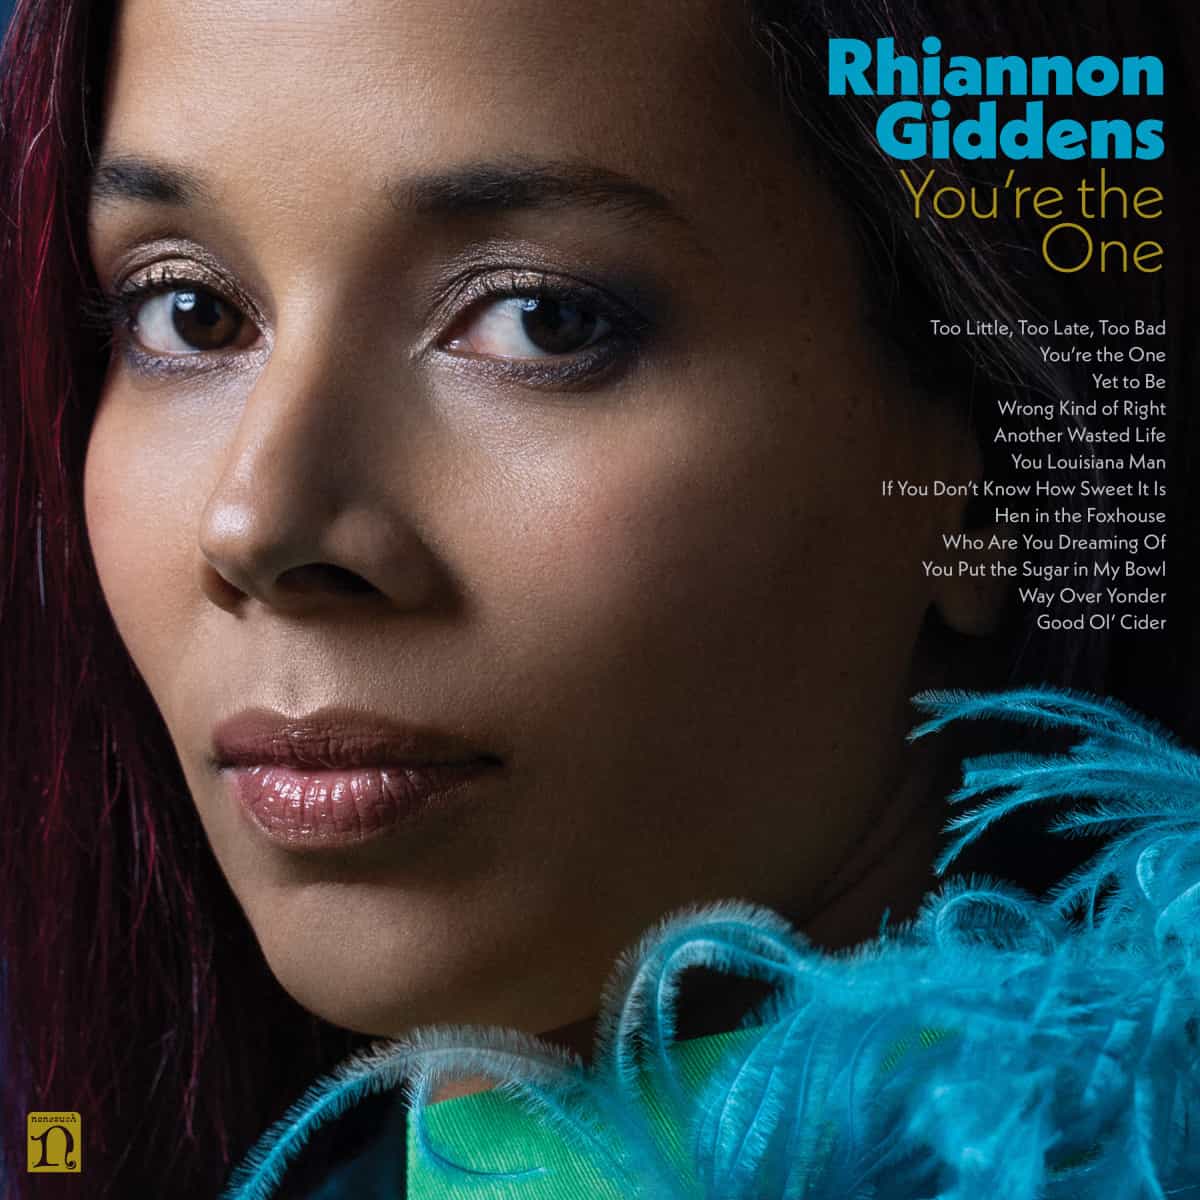 Rhiannon Giddens: You’re the One